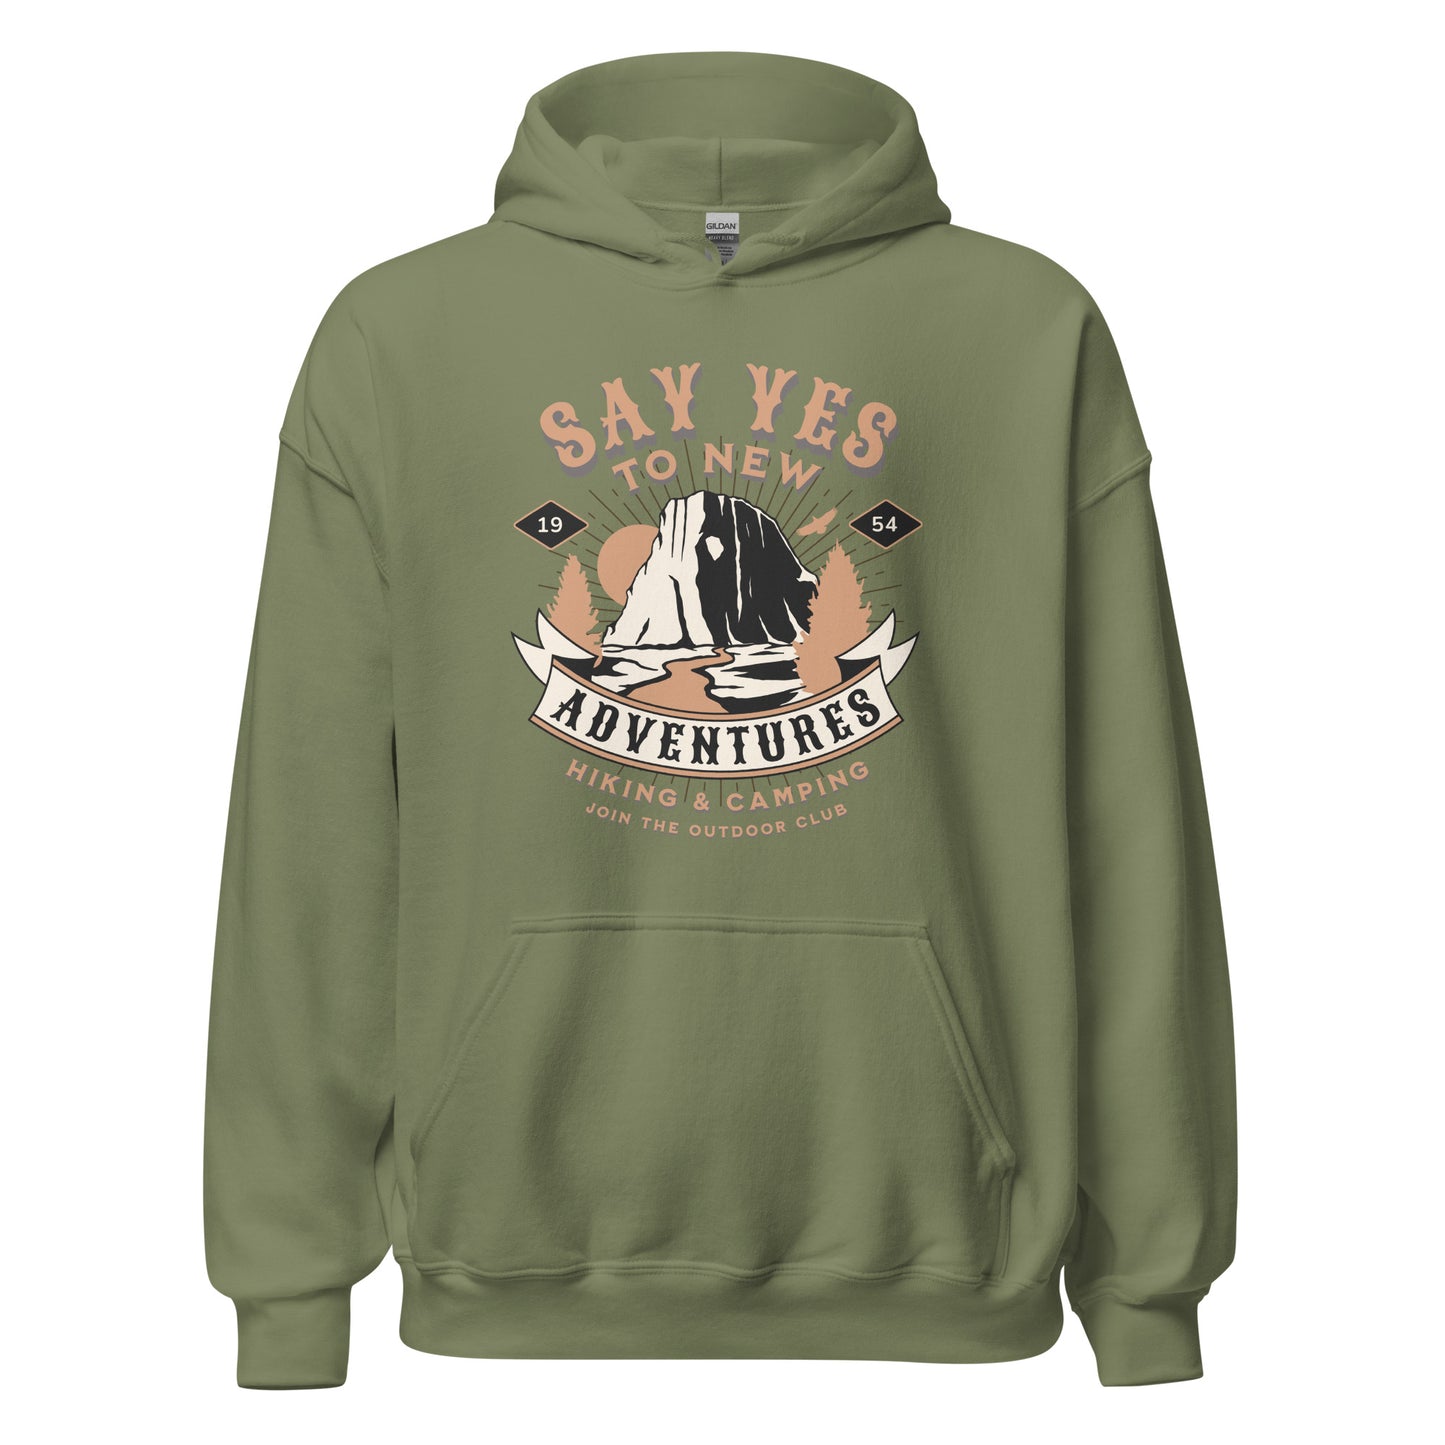 Say Yes to New Adventures Unisex Hoodie